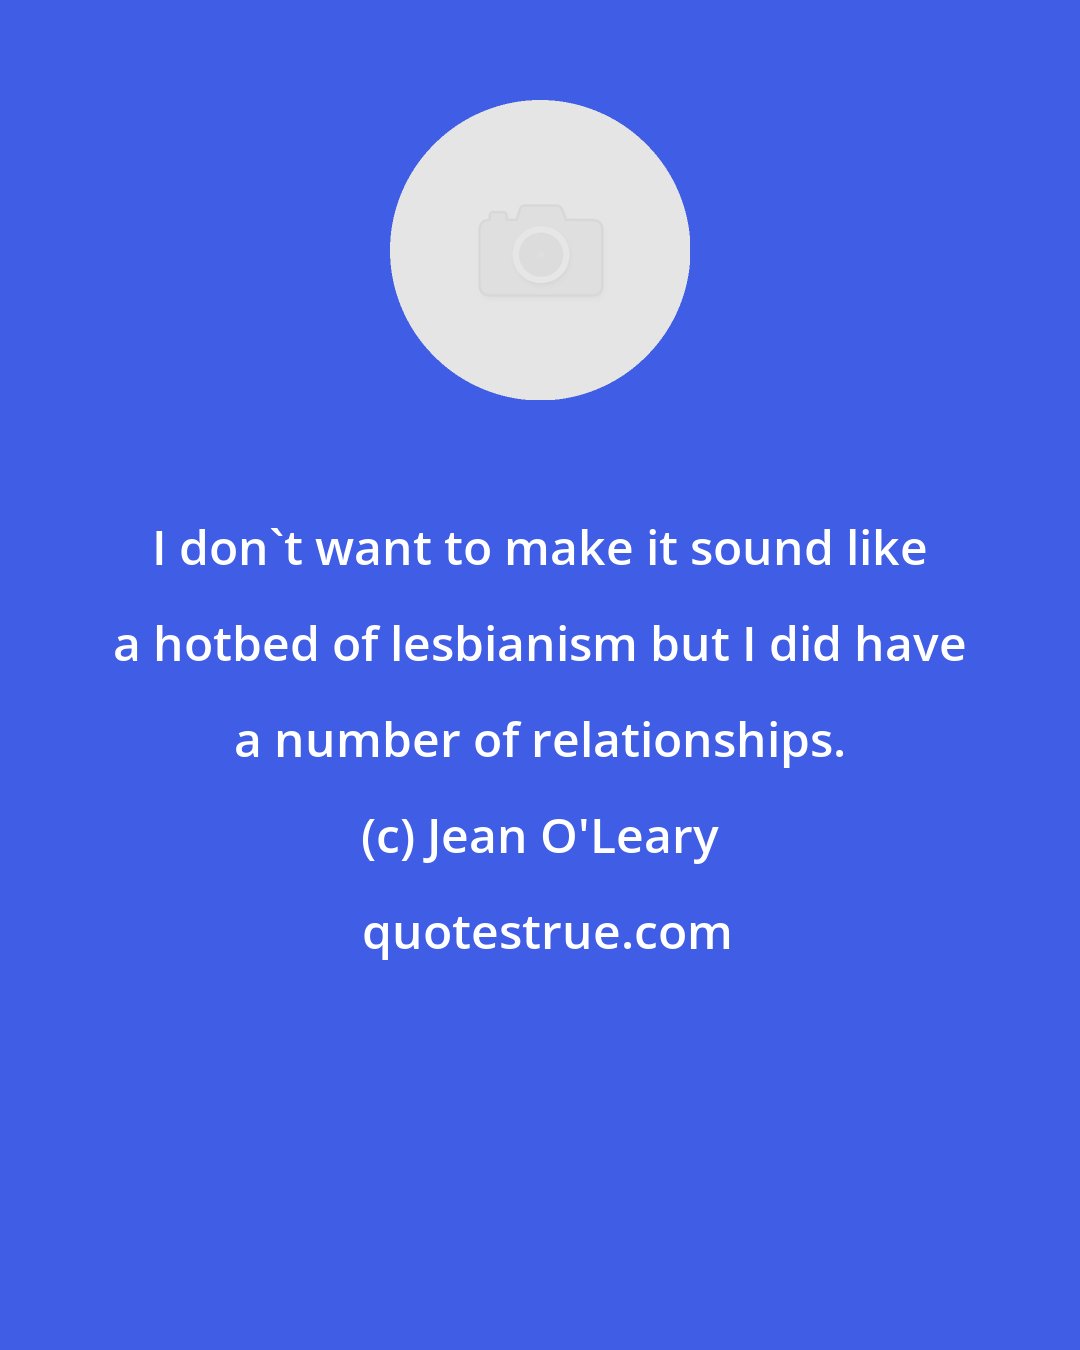 Jean O'Leary: I don't want to make it sound like a hotbed of lesbianism but I did have a number of relationships.